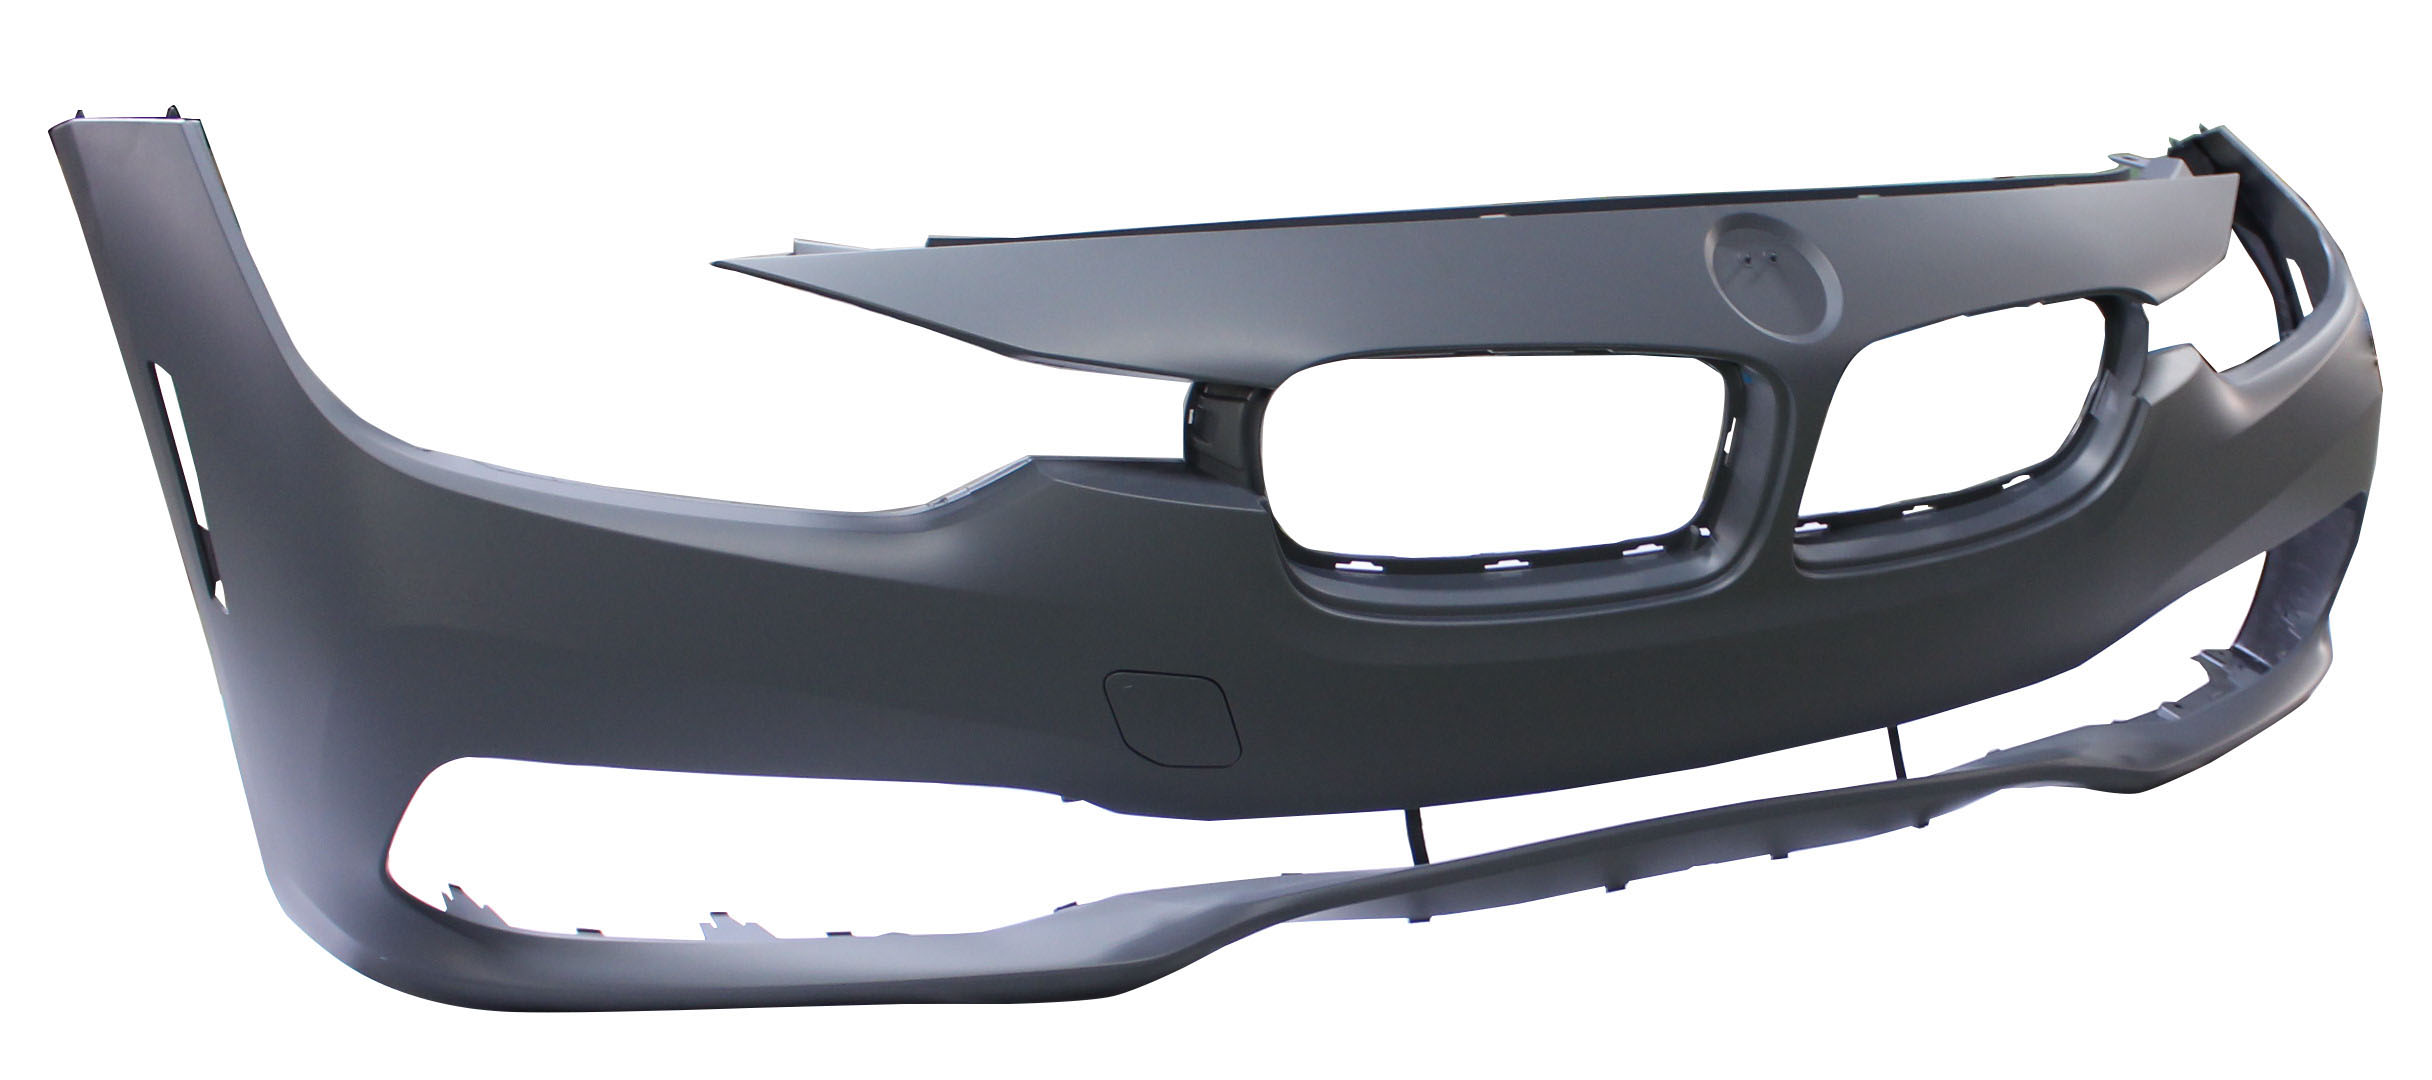 Aftermarket BUMPER COVERS for BMW - 330I, 330i,17-18,Front bumper cover